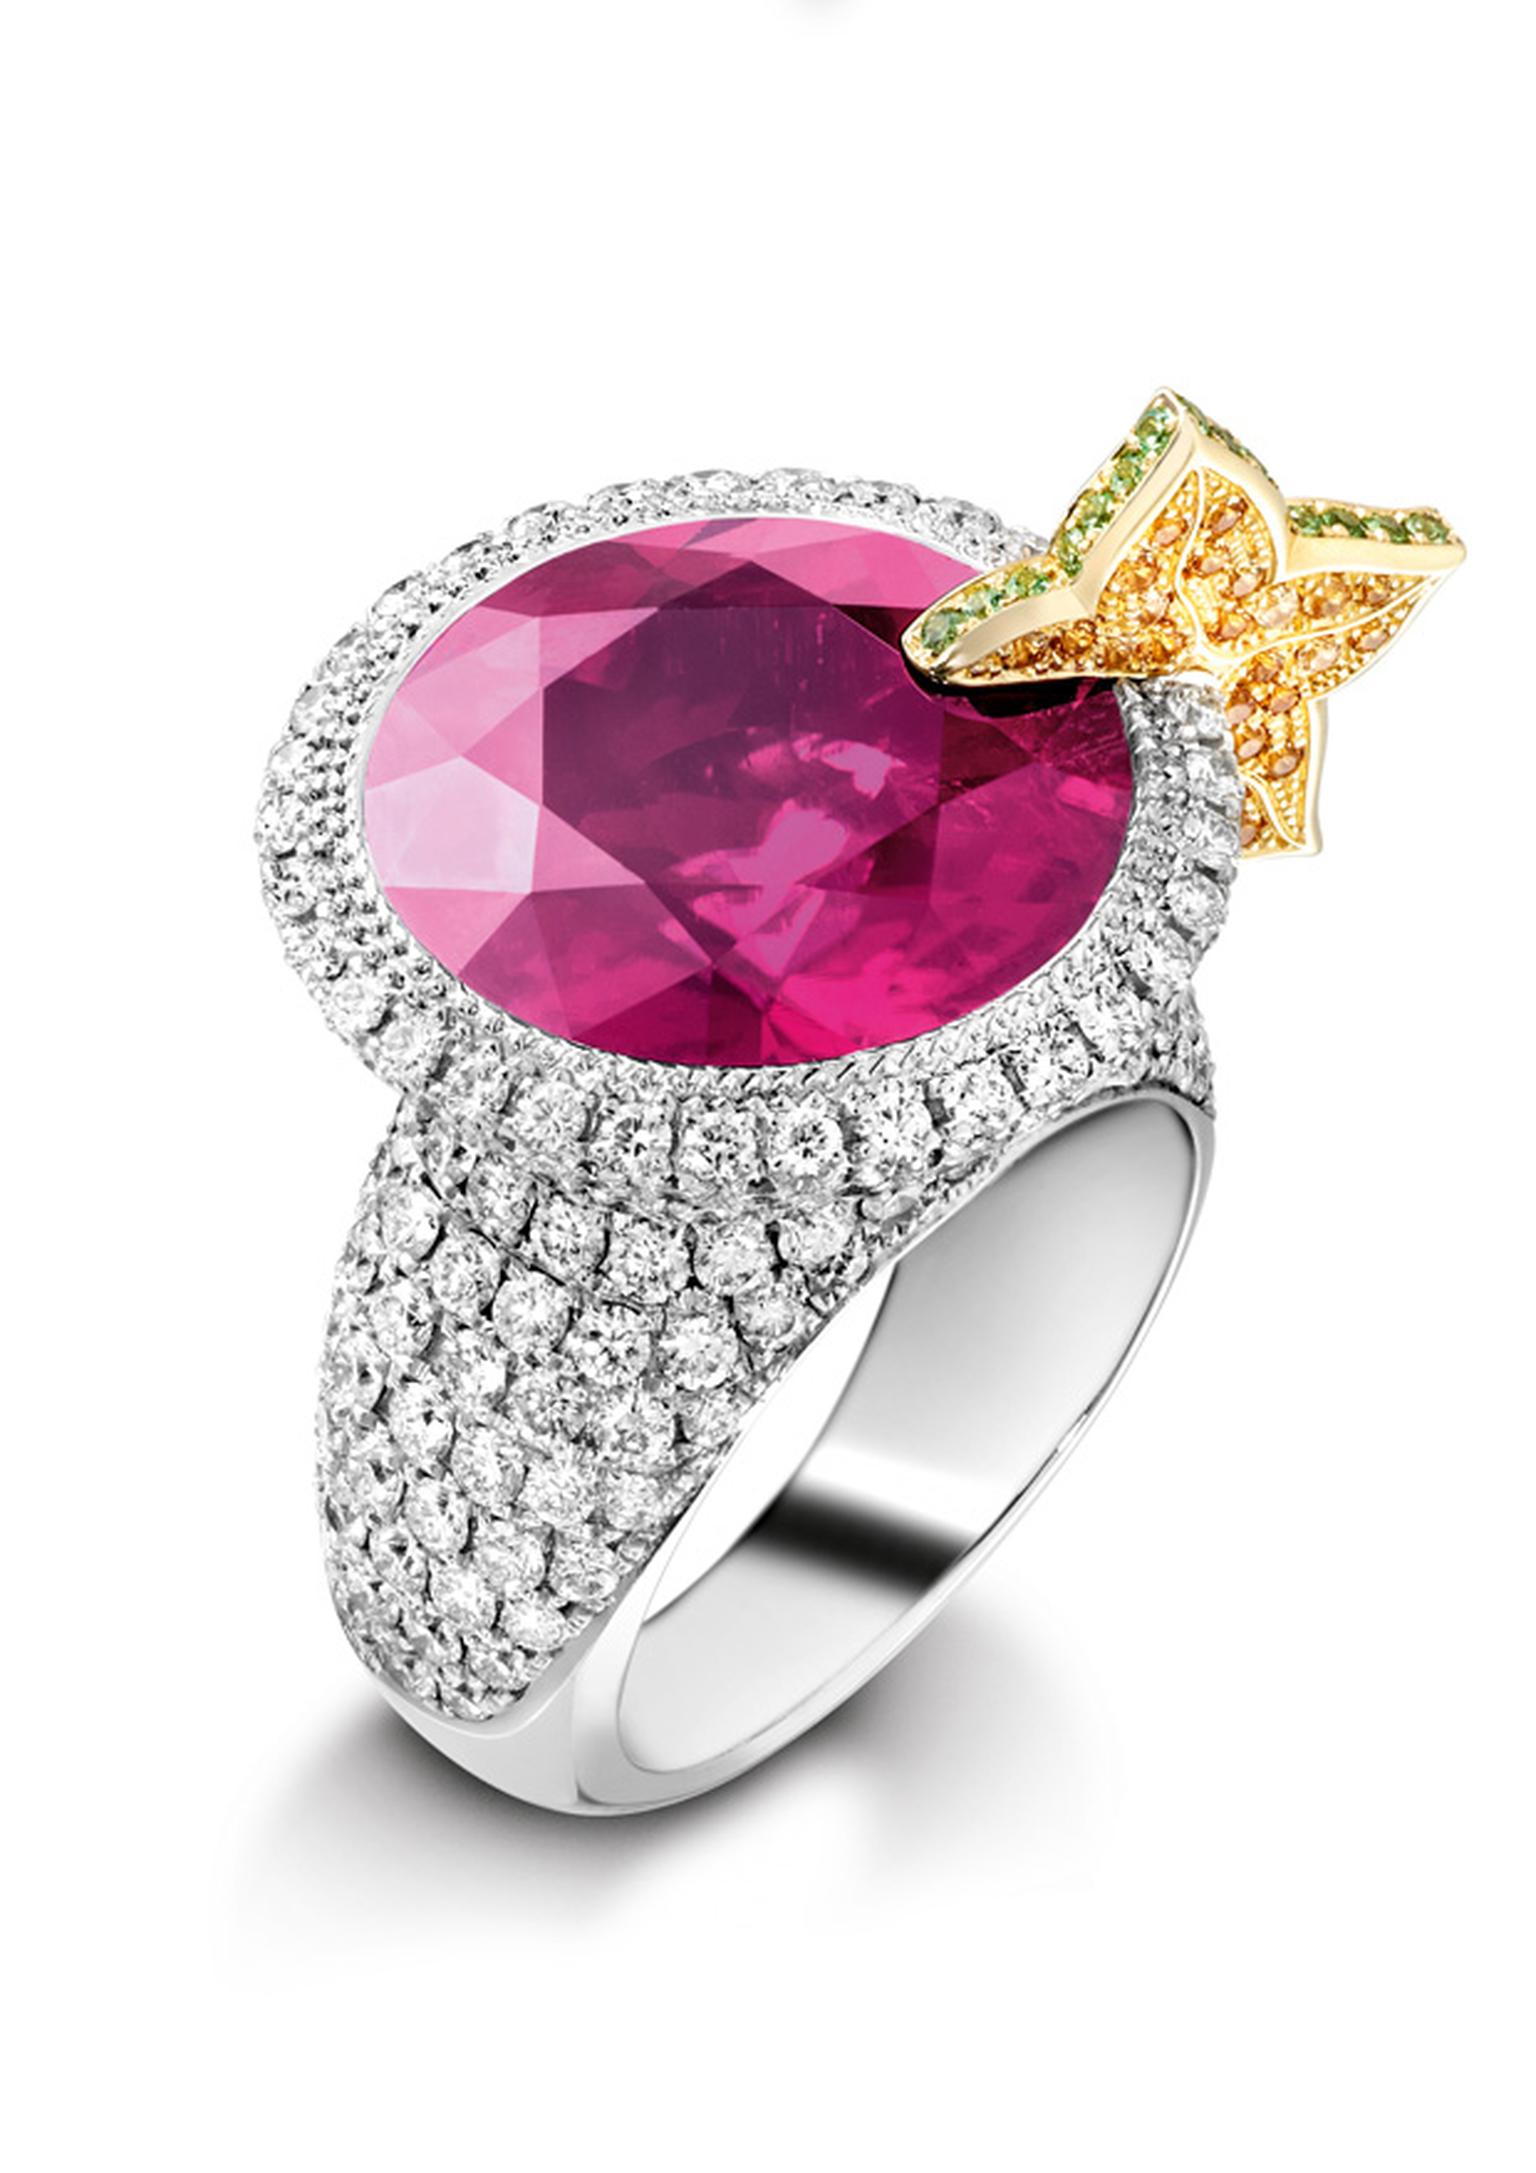 Piaget Cosmopolitan inspired cocktail ring with rubelite, diamonds and citrine